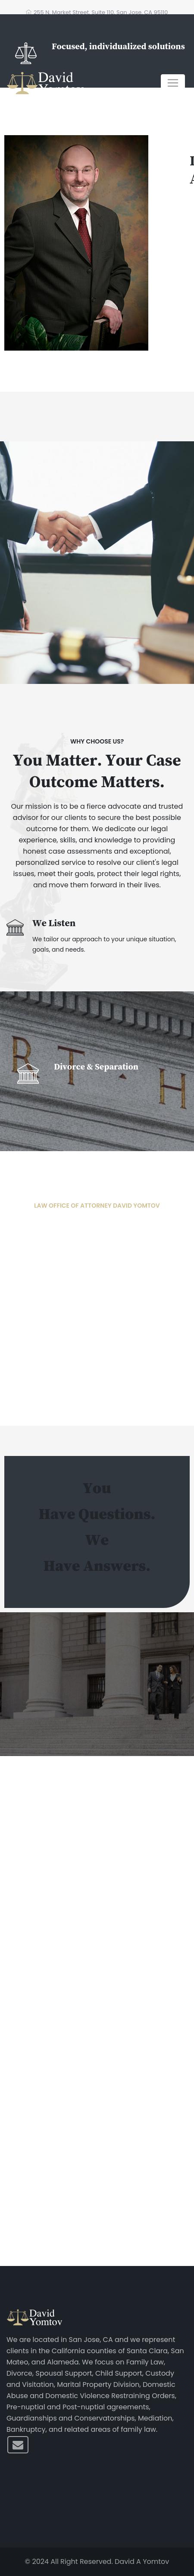 David A. Yomtov, Attorney at Law - San Jose CA Lawyers